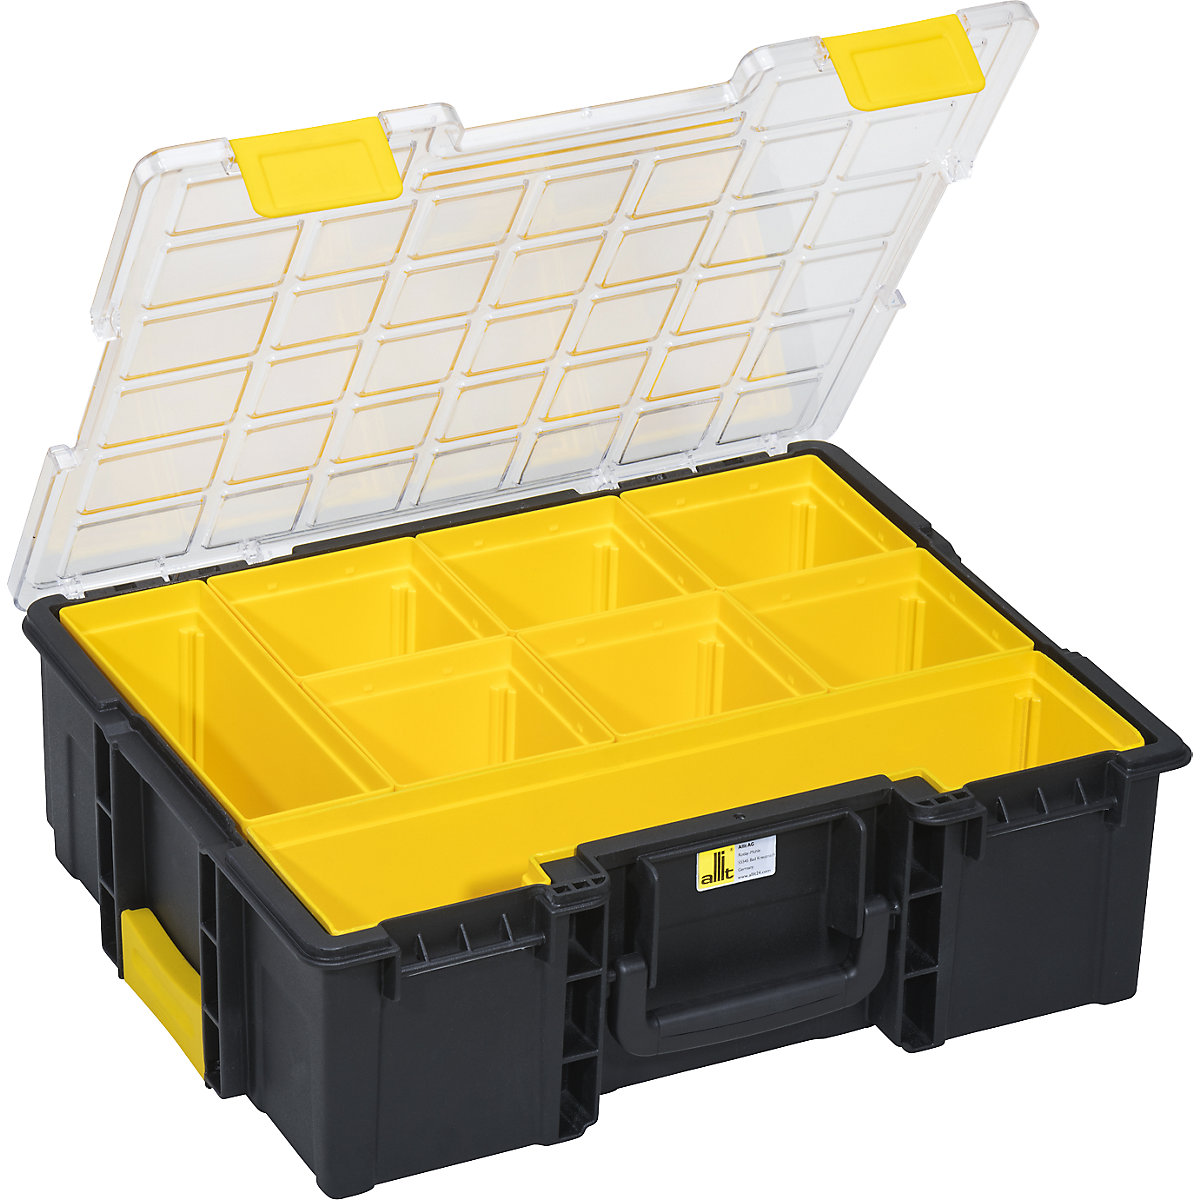 Professional small parts case